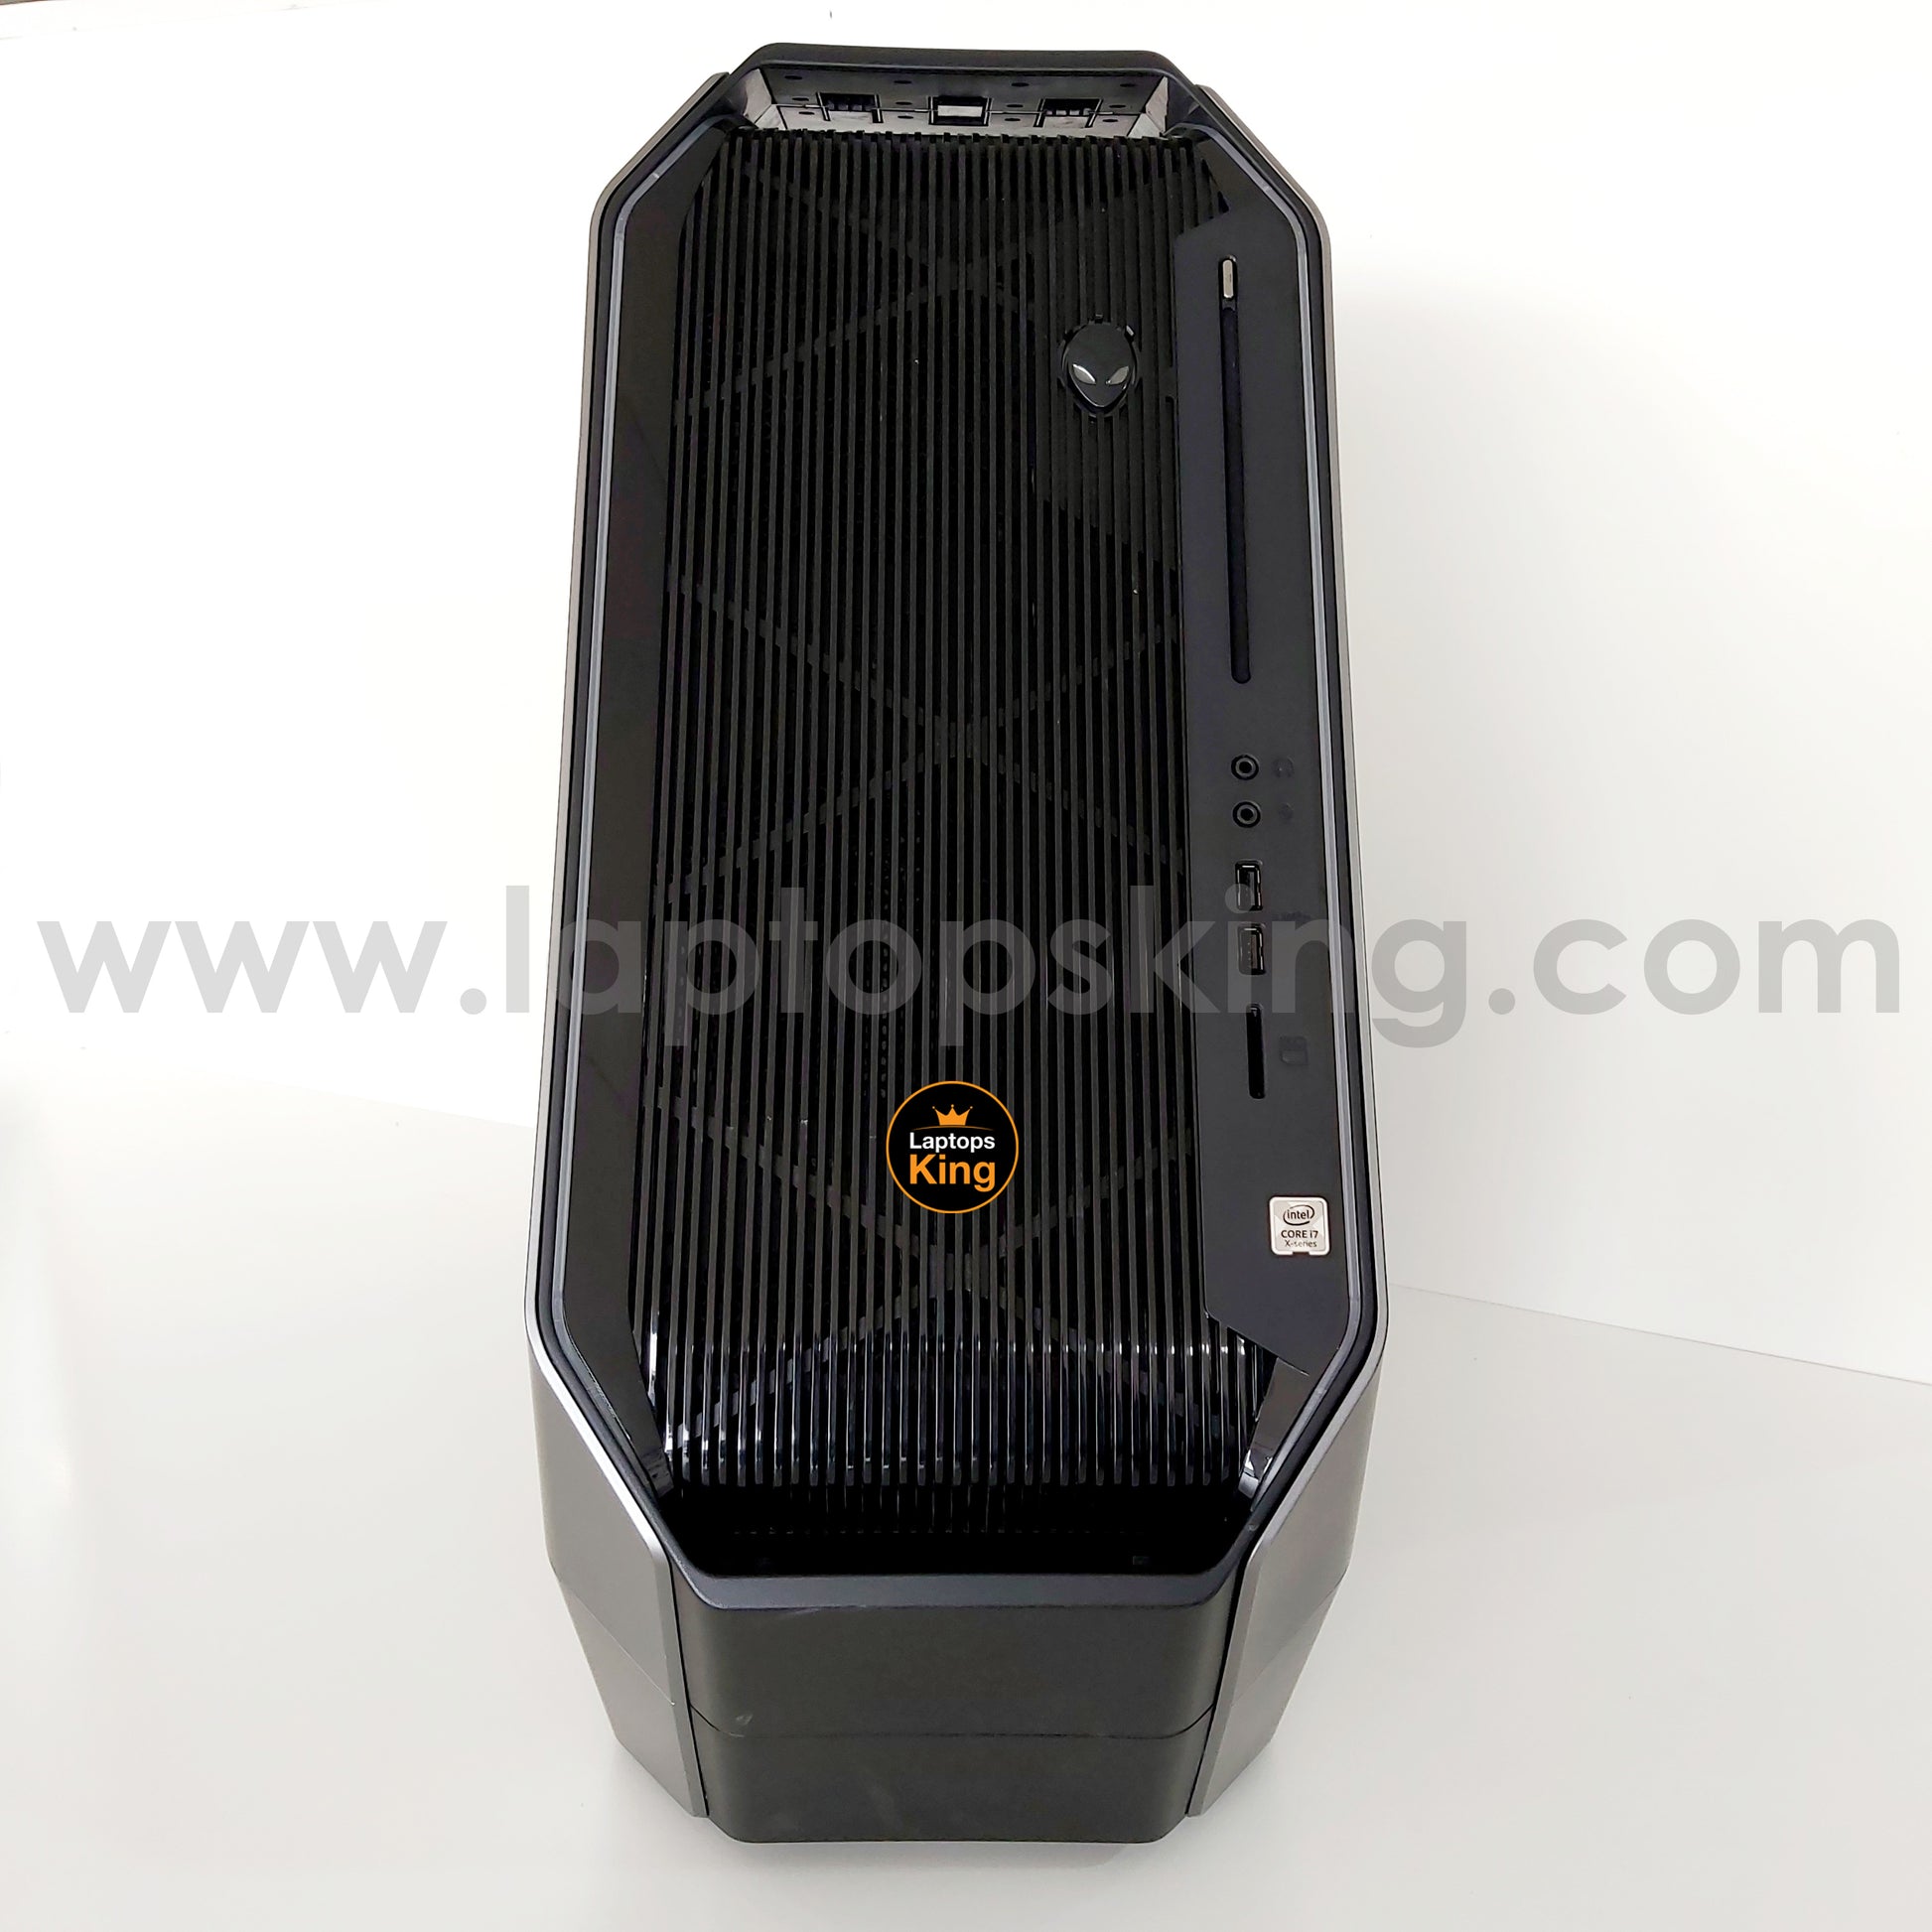 Alienware Area51 i7-7800x GTX 1660 Super - Gaming Desktop Computer (Used Just Like New) Gaming computer, Graphic Design computer, best computer for gaming, best computer for graphic design, computer for sale Lebanon, computer for video editing in Lebanon, computer for sale Lebanon, best graphic design computer, best video editing computer, best programming computer, computer for sale in Lebanon, computer for sale in Lebanon, computer for sale in Lebanon, buy computer Lebanon, buy laptop Lebanon.